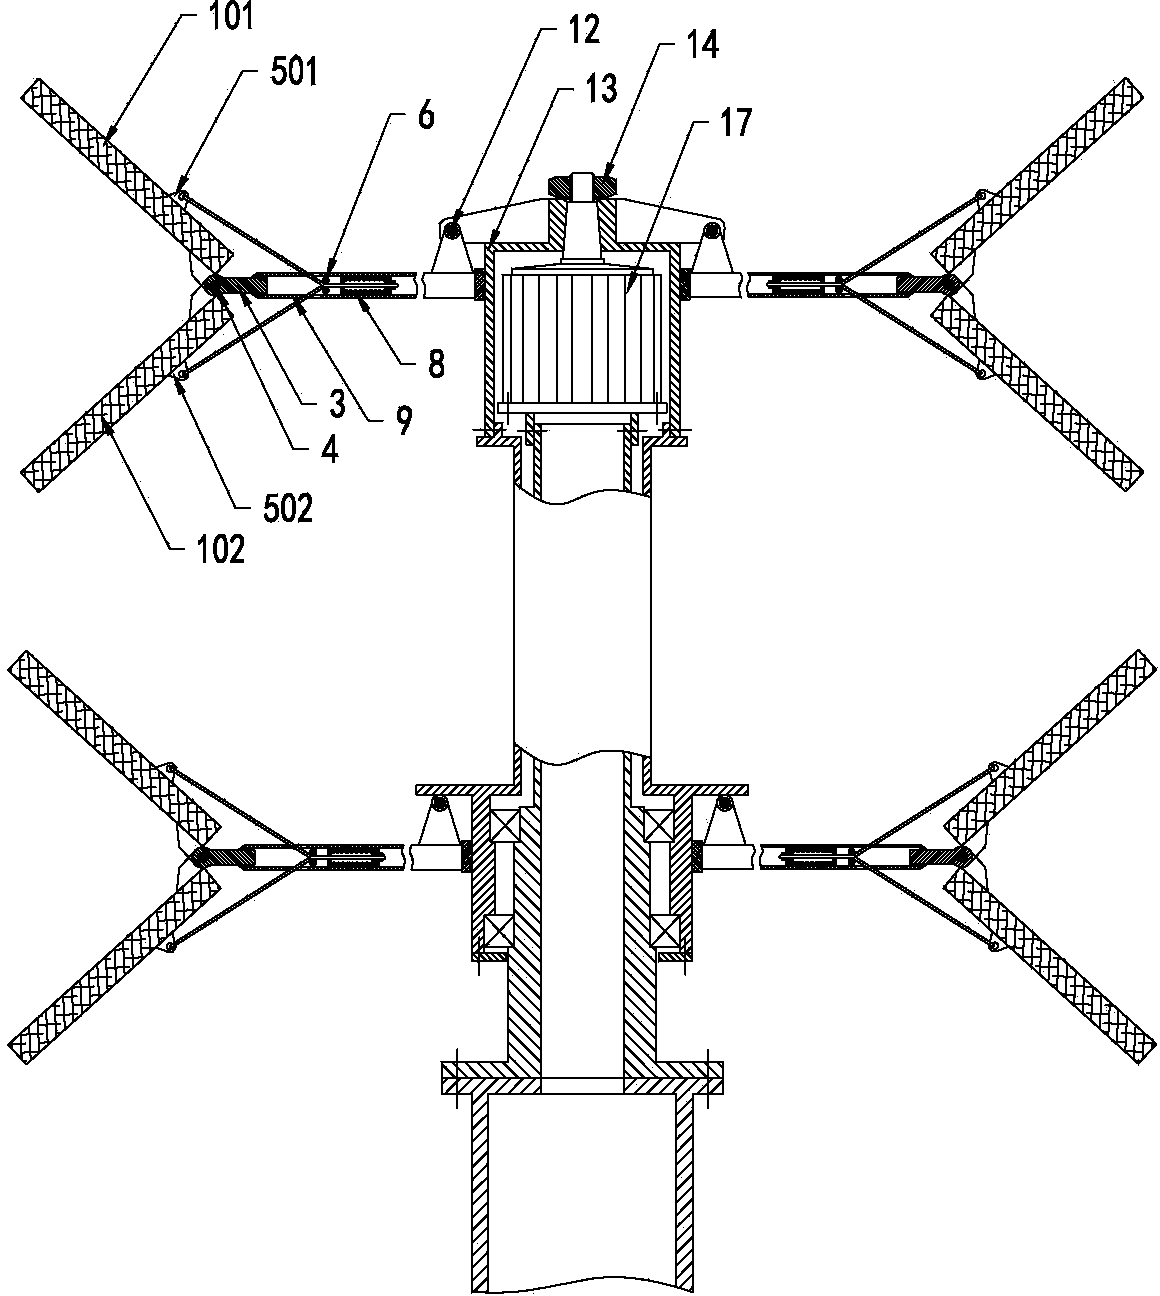 Vertical-axis wind turbine generator system with multi-layer wings and double swing vanes